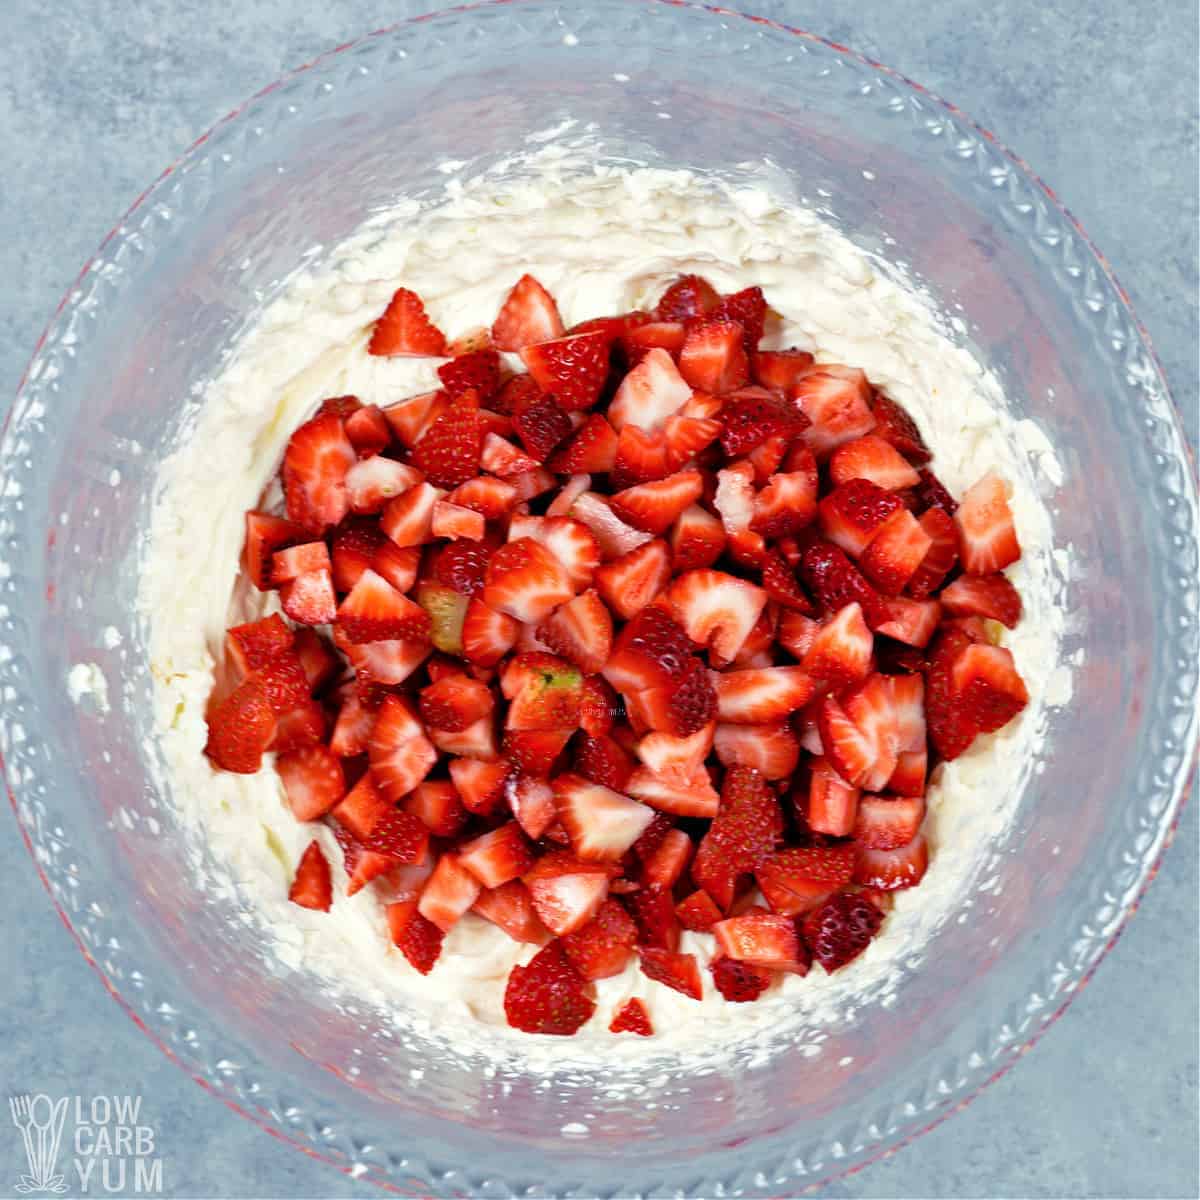 chopped strawberries added to the cream cheese mixture.